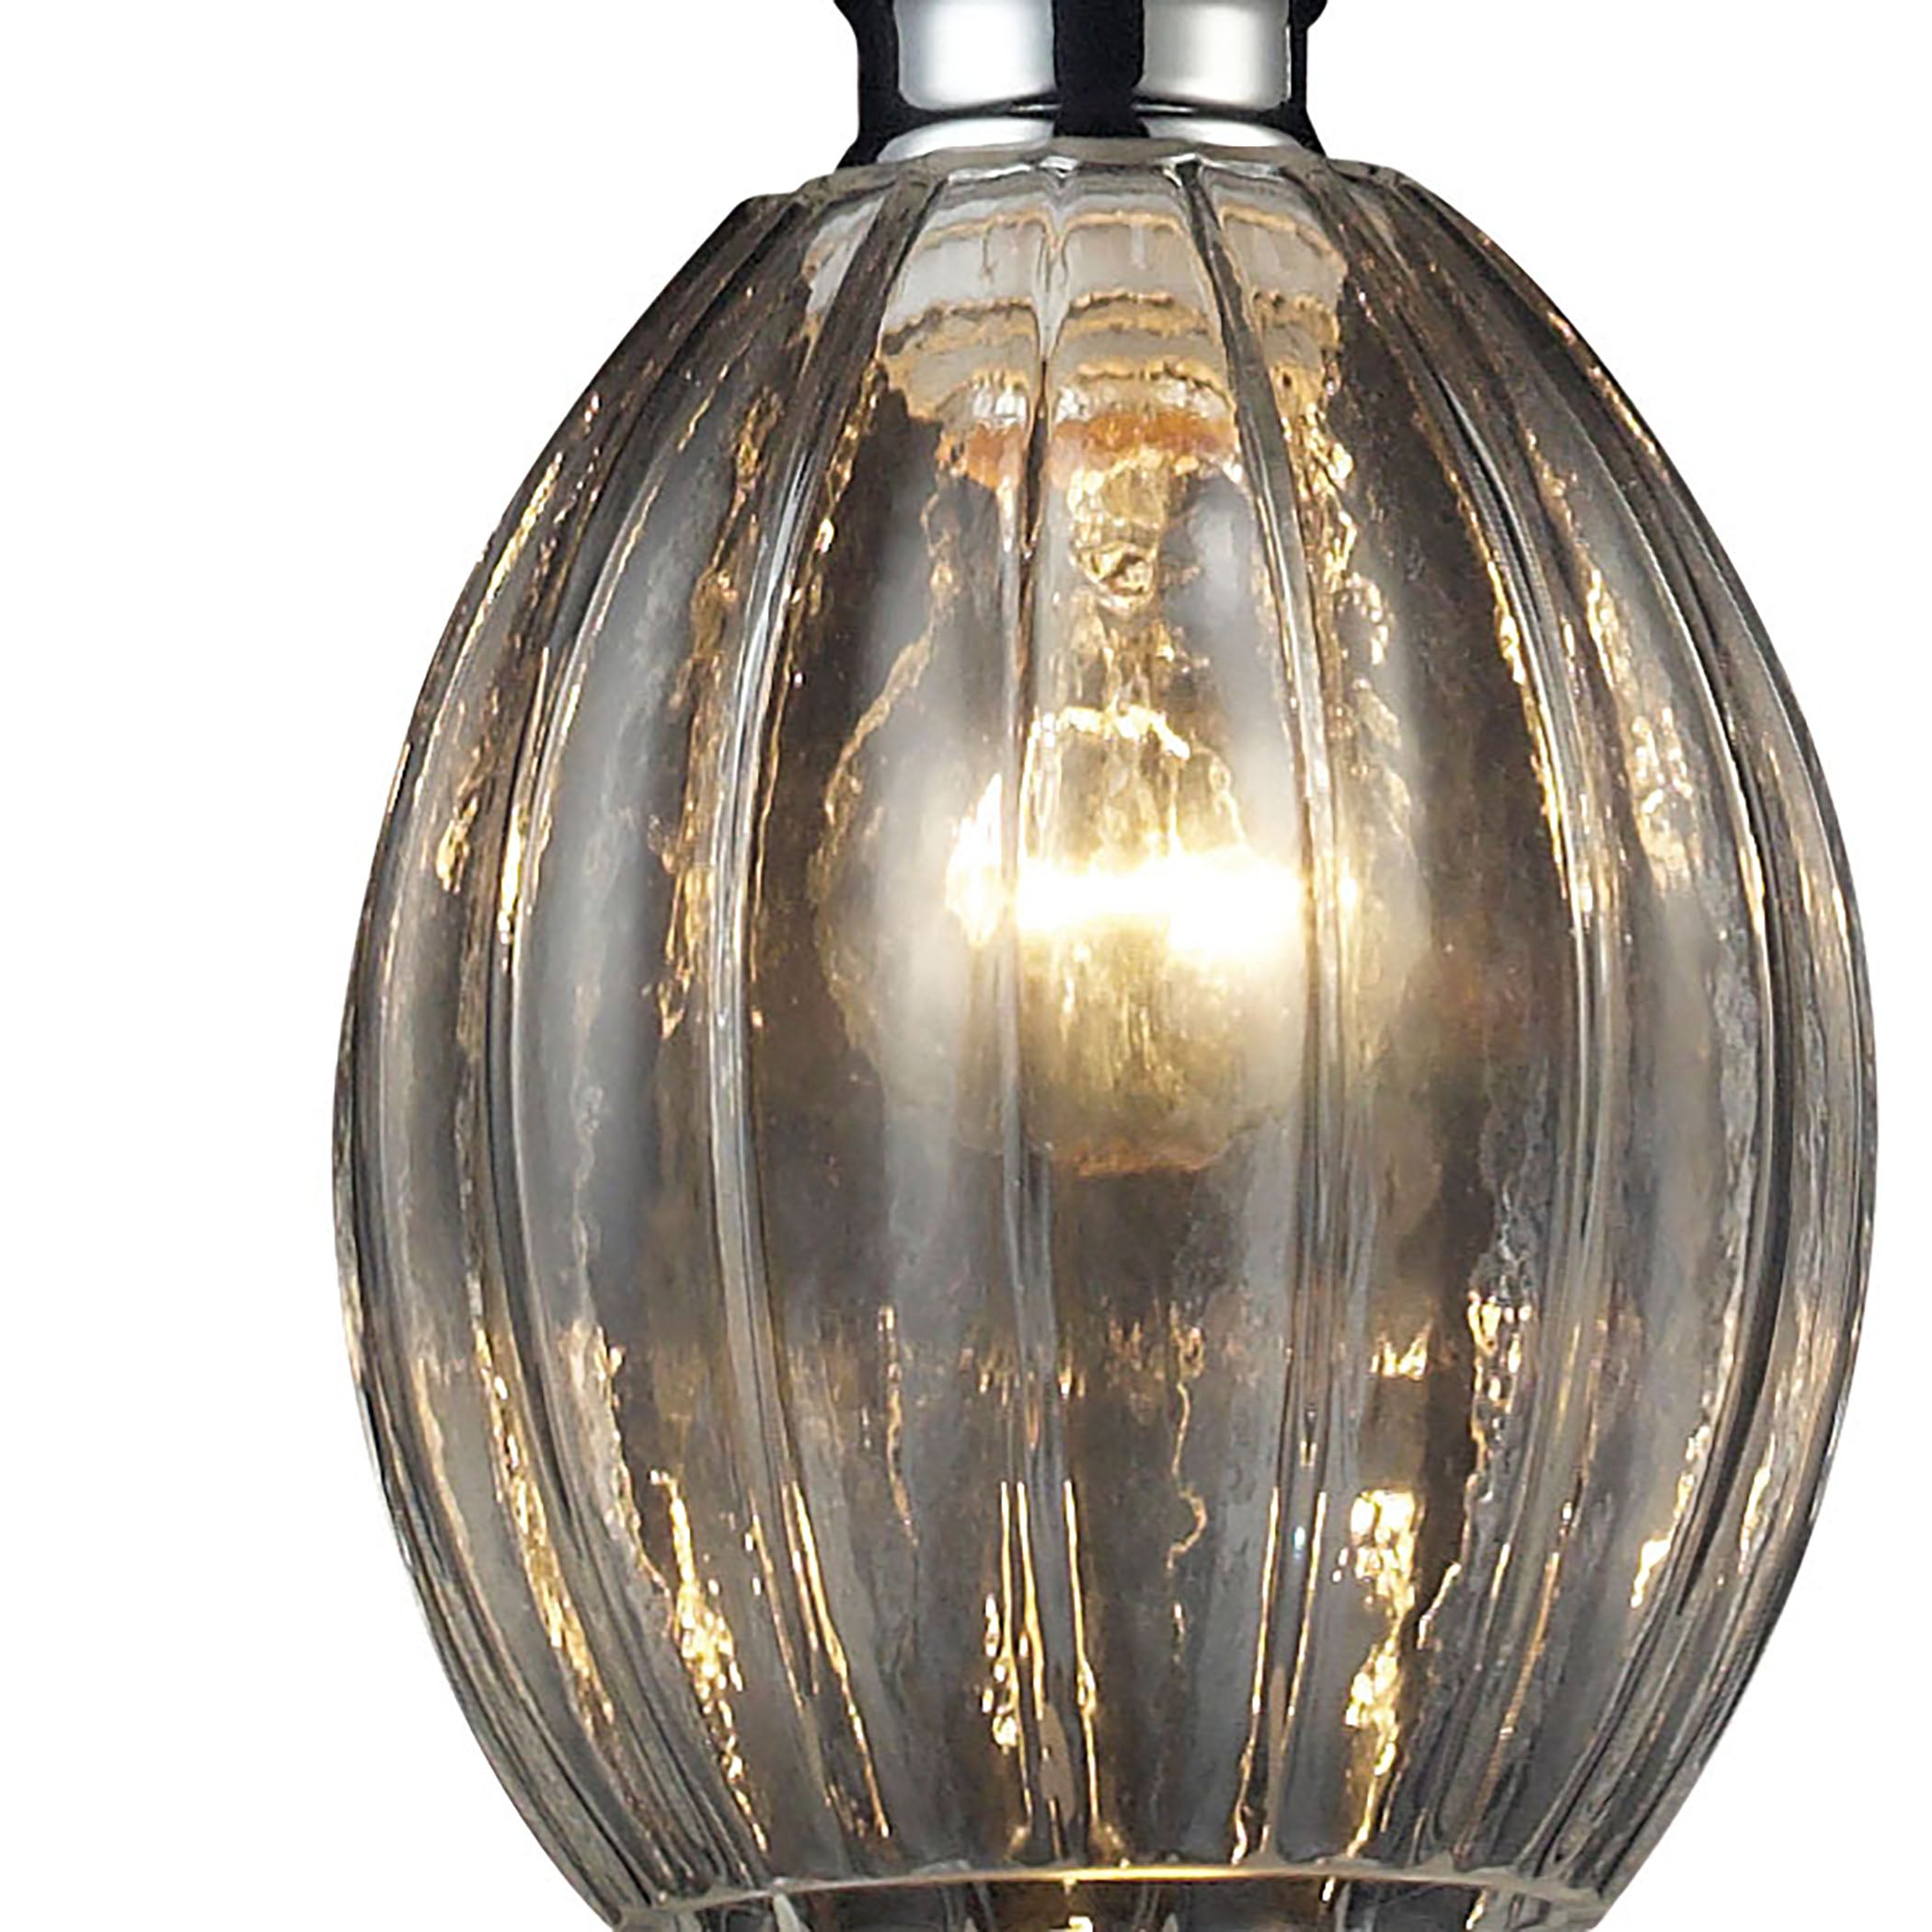 ELK Lighting 46017/1 Danica 1-Light Mini Pendant in Polished Chrome with Clear Glass